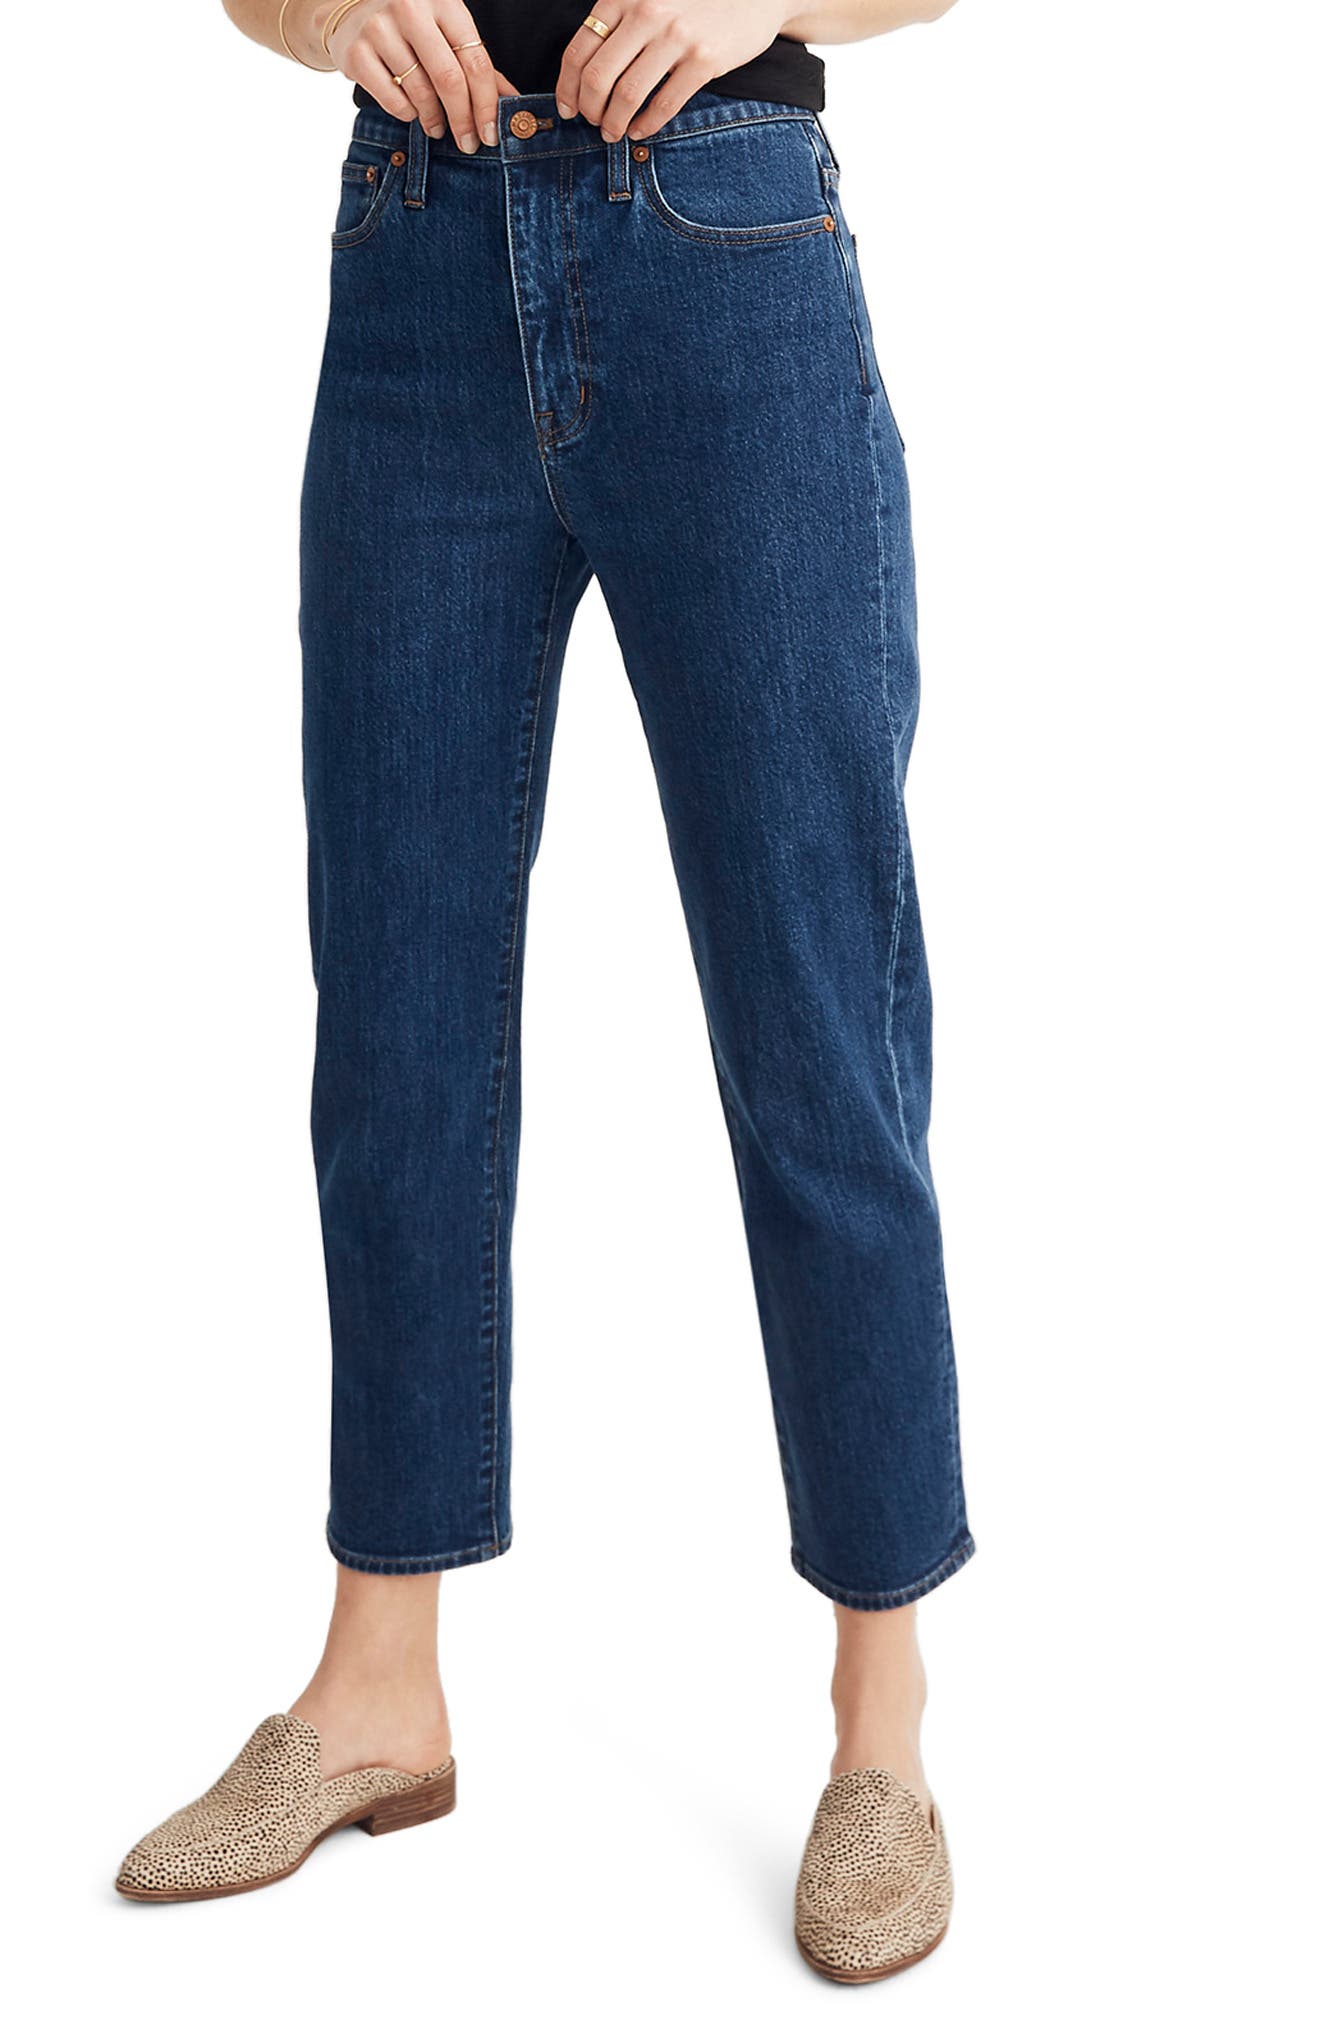 tapered jeans in bellclaire wash